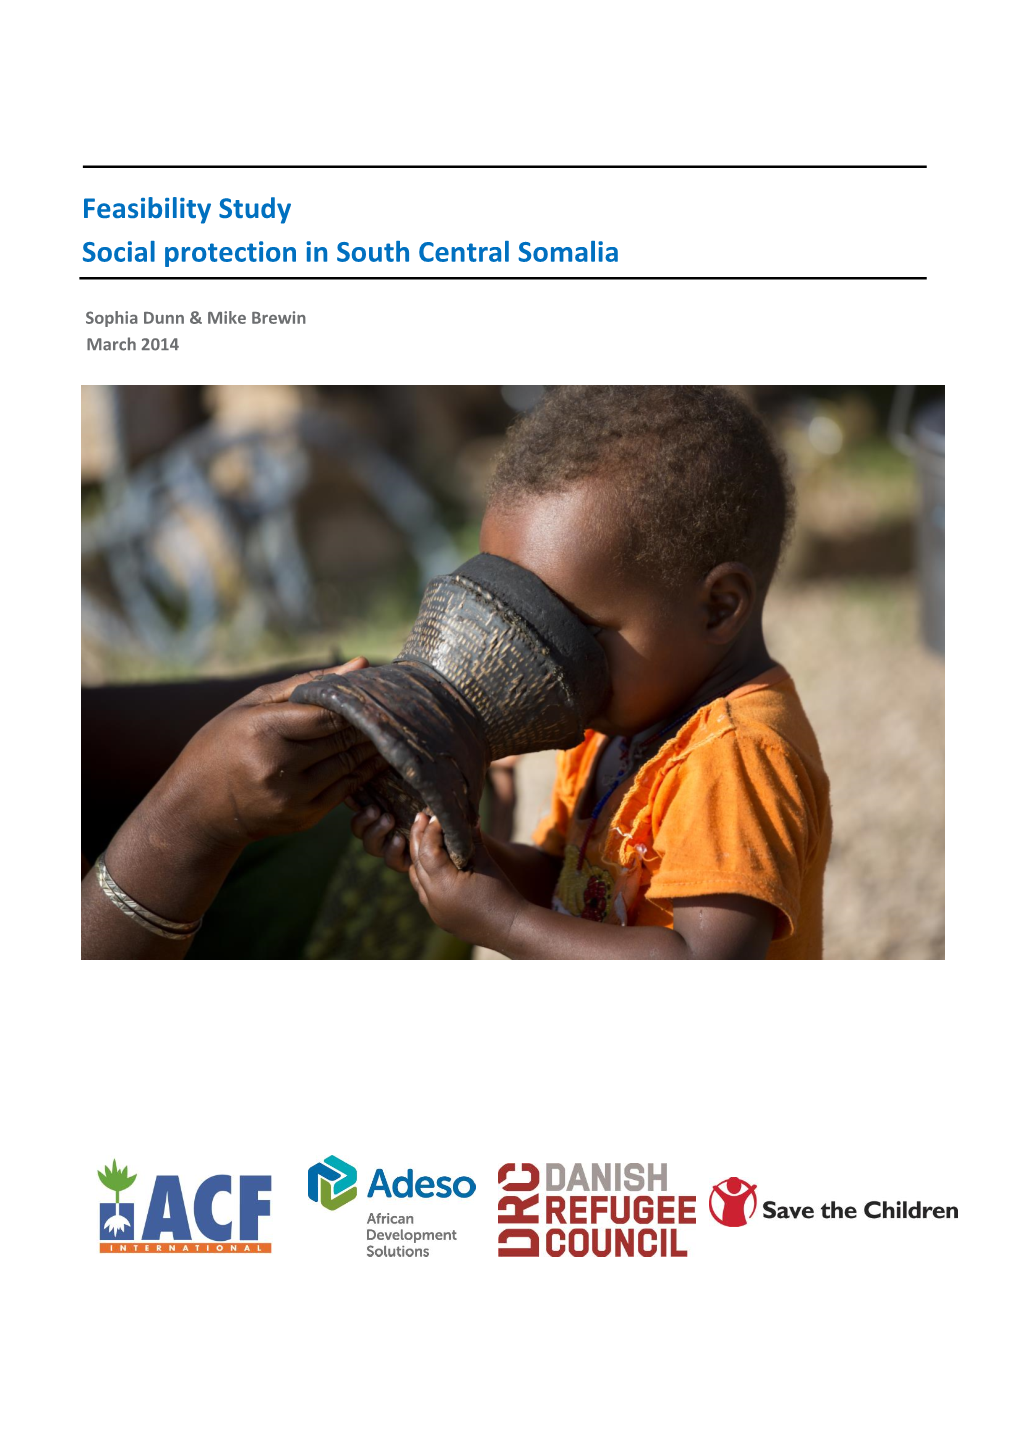 Feasibility Study Social Protection in South Central Somalia